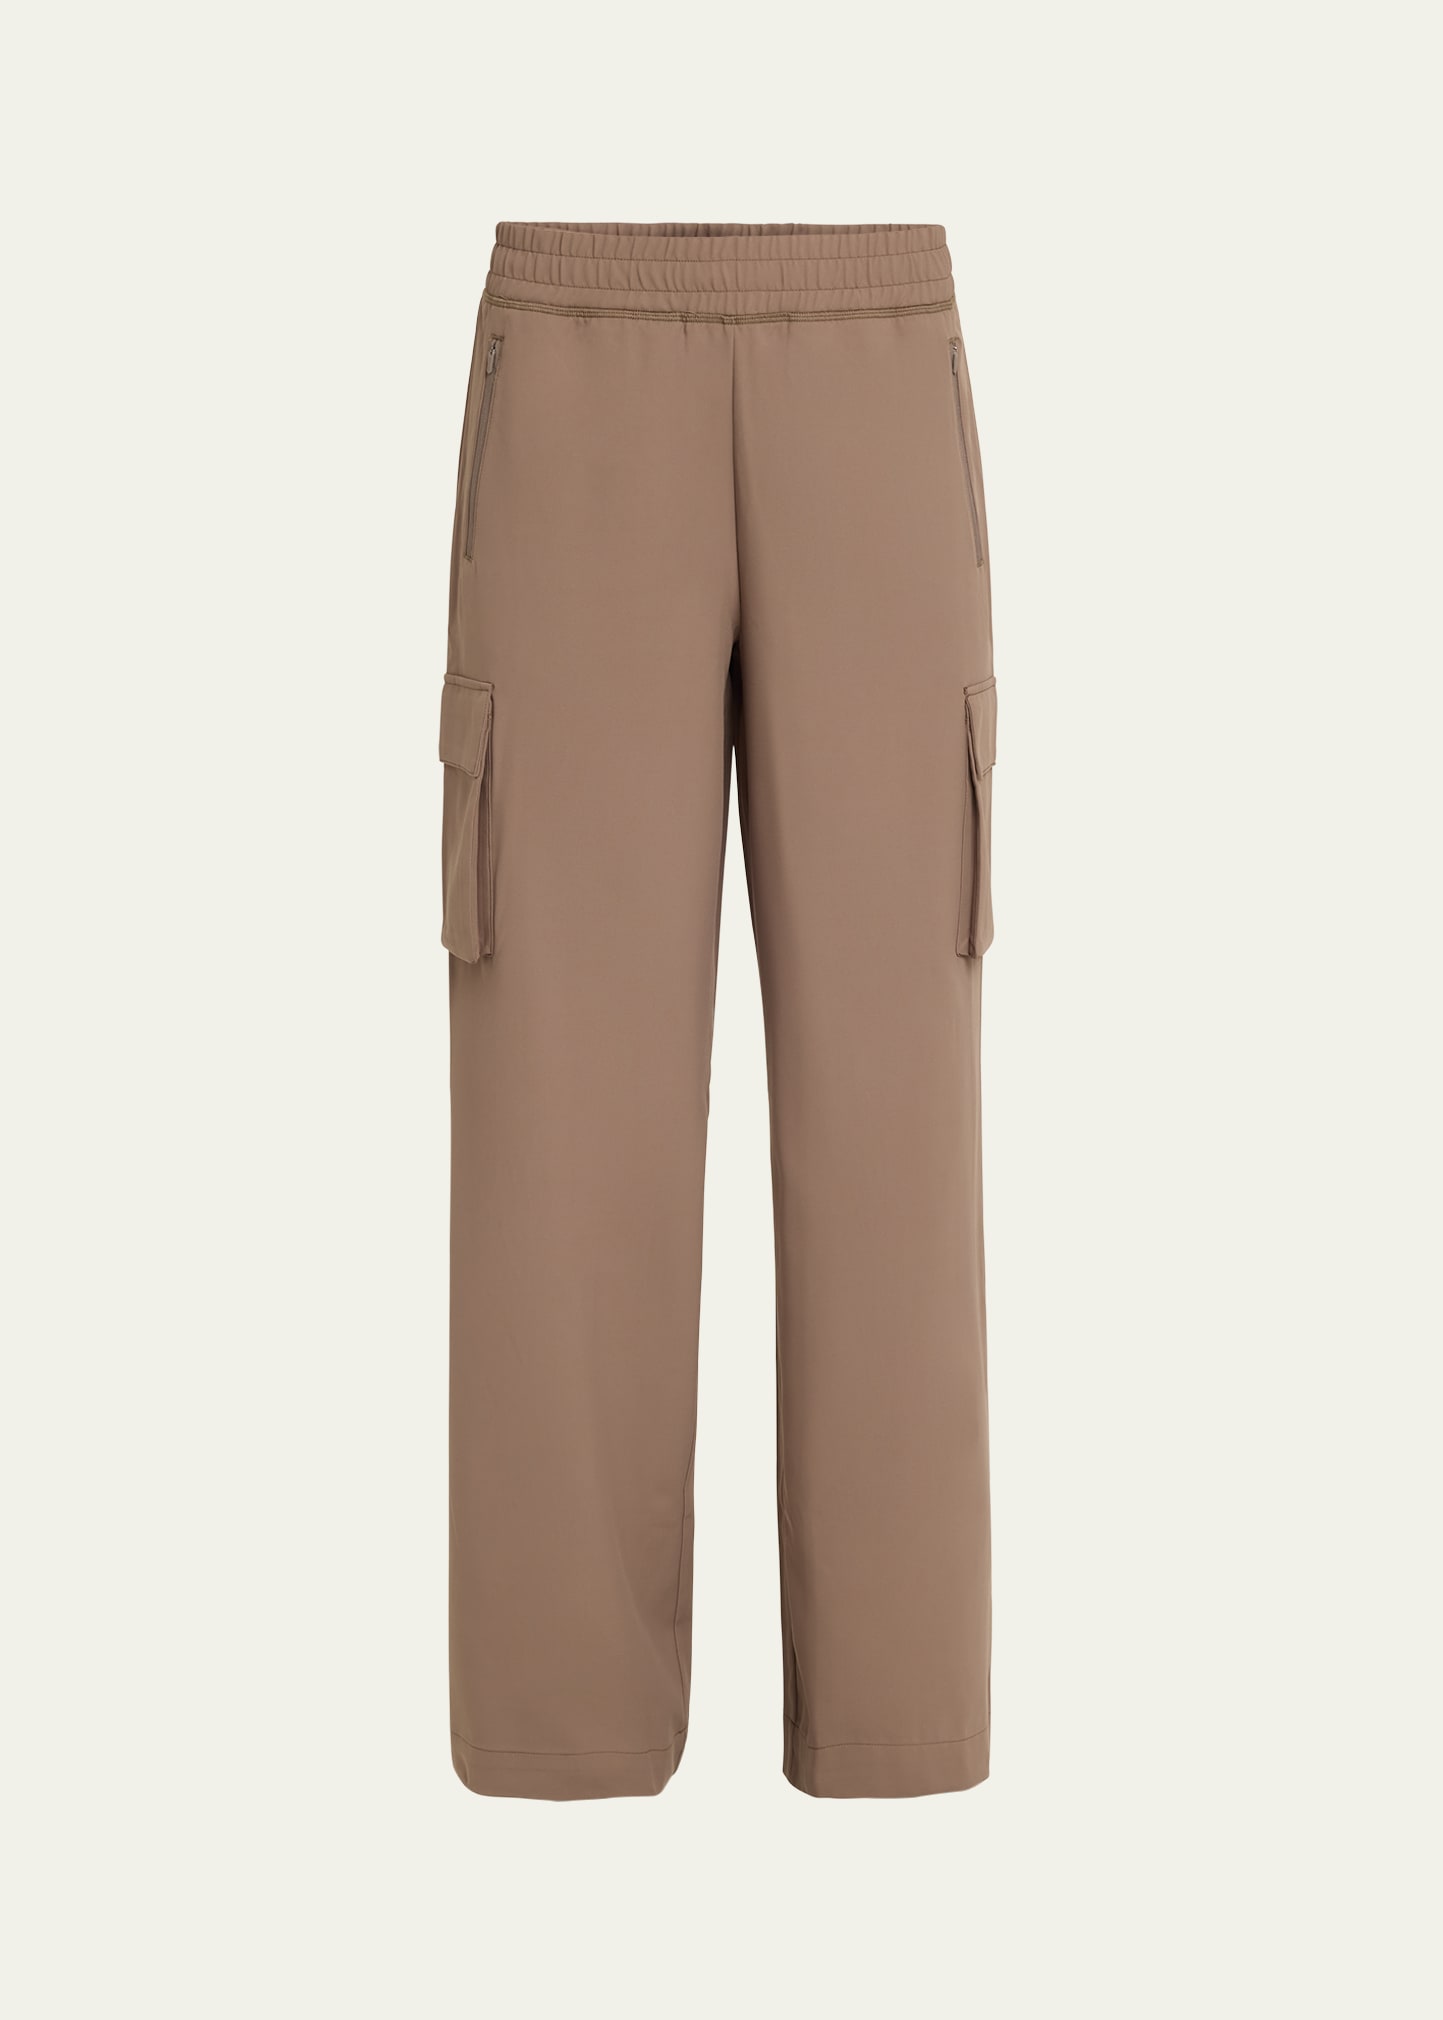 Beyond Yoga City Chic Cargo Pants In Brown